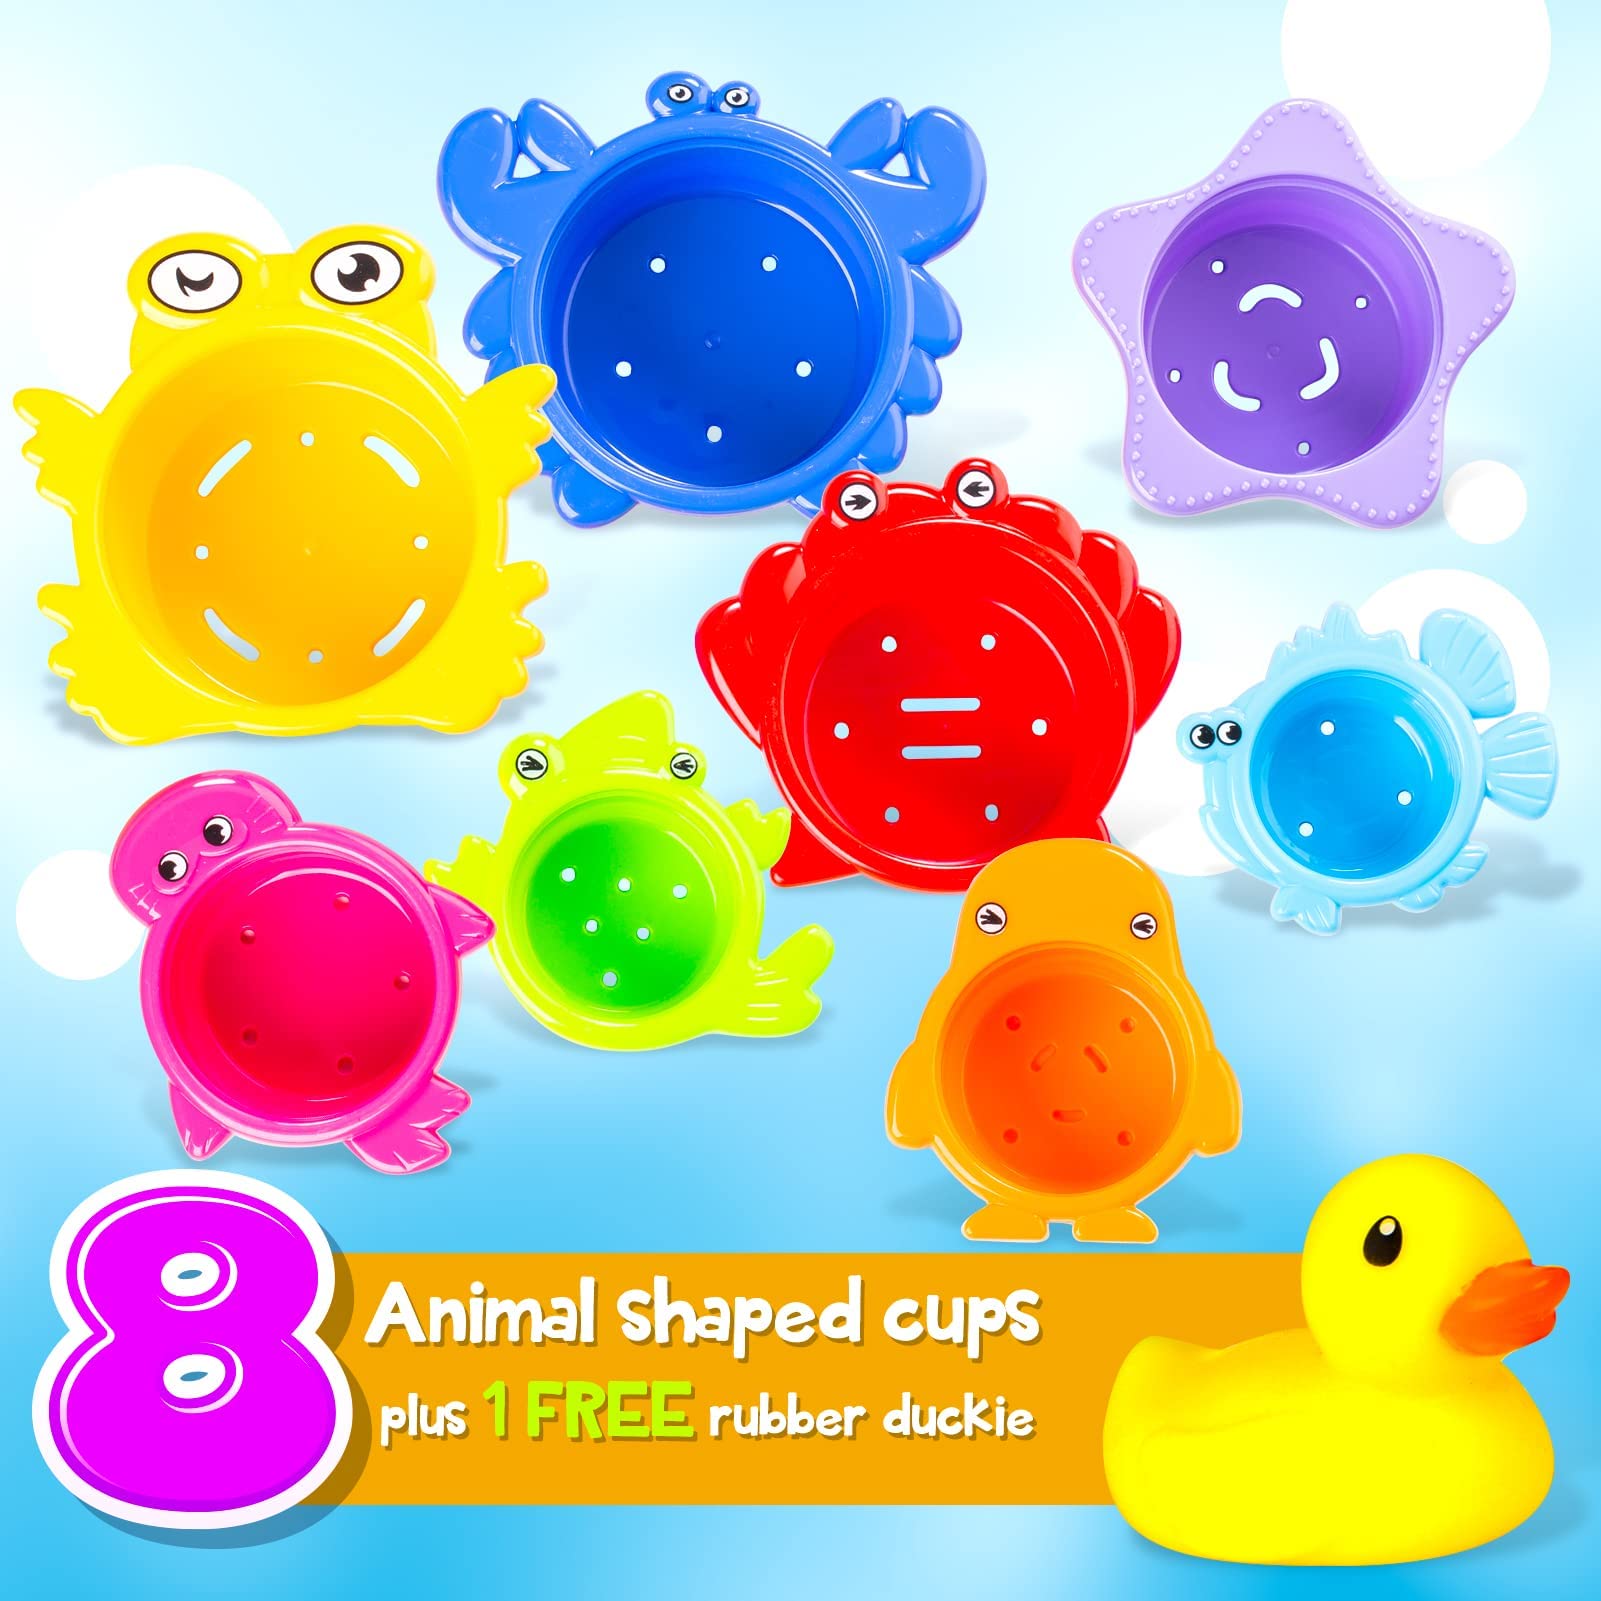 SMALL FISH Stacking Cups Bath Toys for Toddlers, Rainbow Bath Cups for Baby 1-3 Years Old, Safe Infant Nesting Cups Come with Free Rubber Duckie for Fun Bath Time, Easter Basket Stuffers Easter Gifts